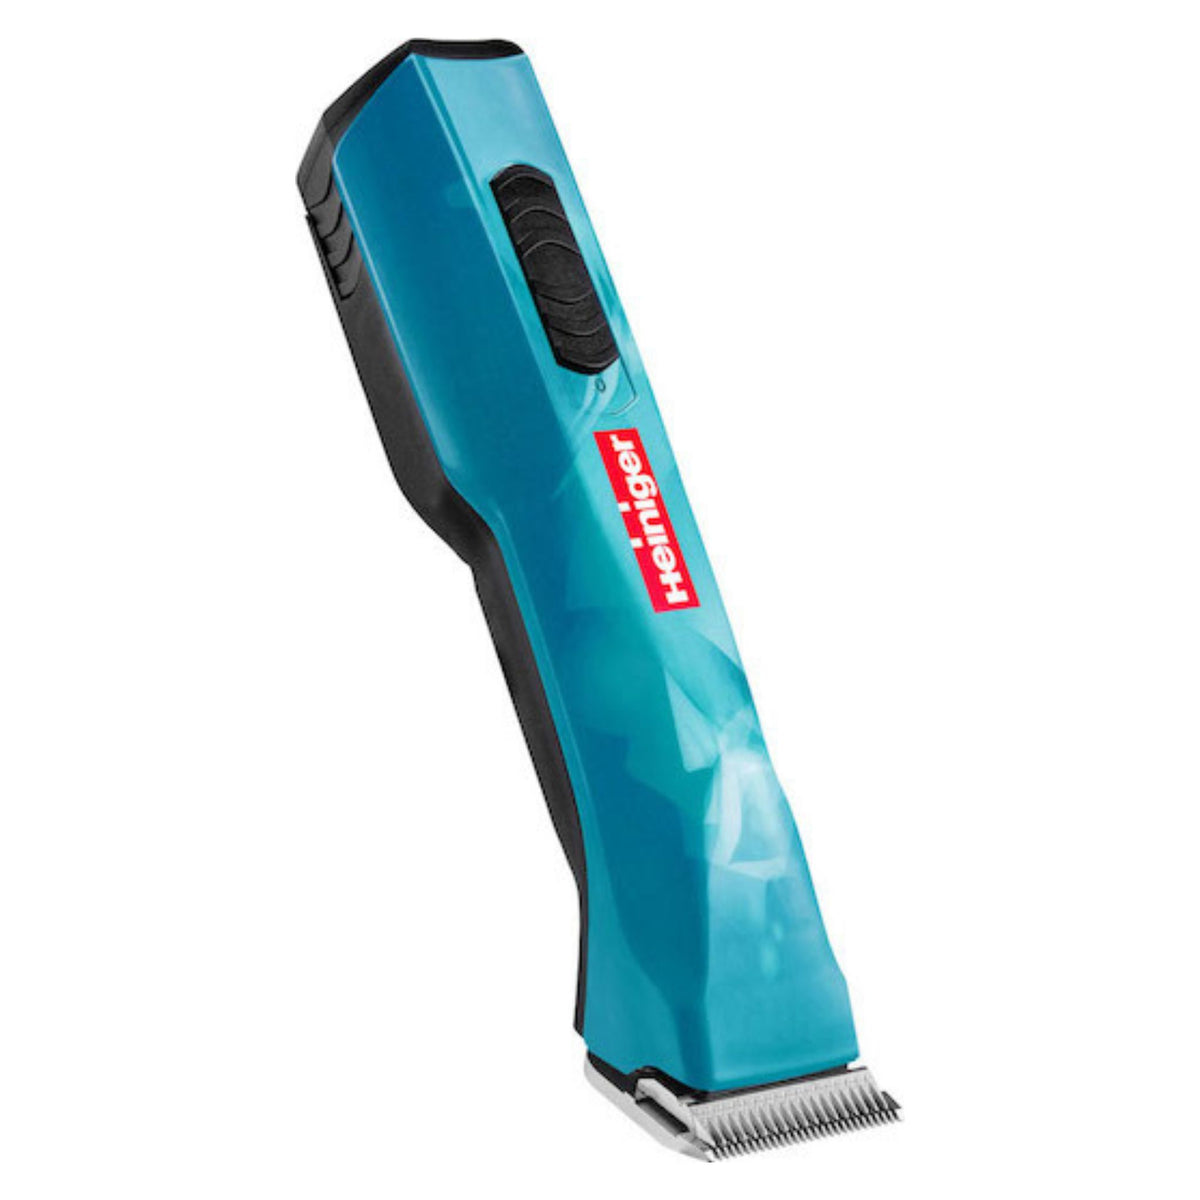 Blue clippers with blade down, with black underside and switch.